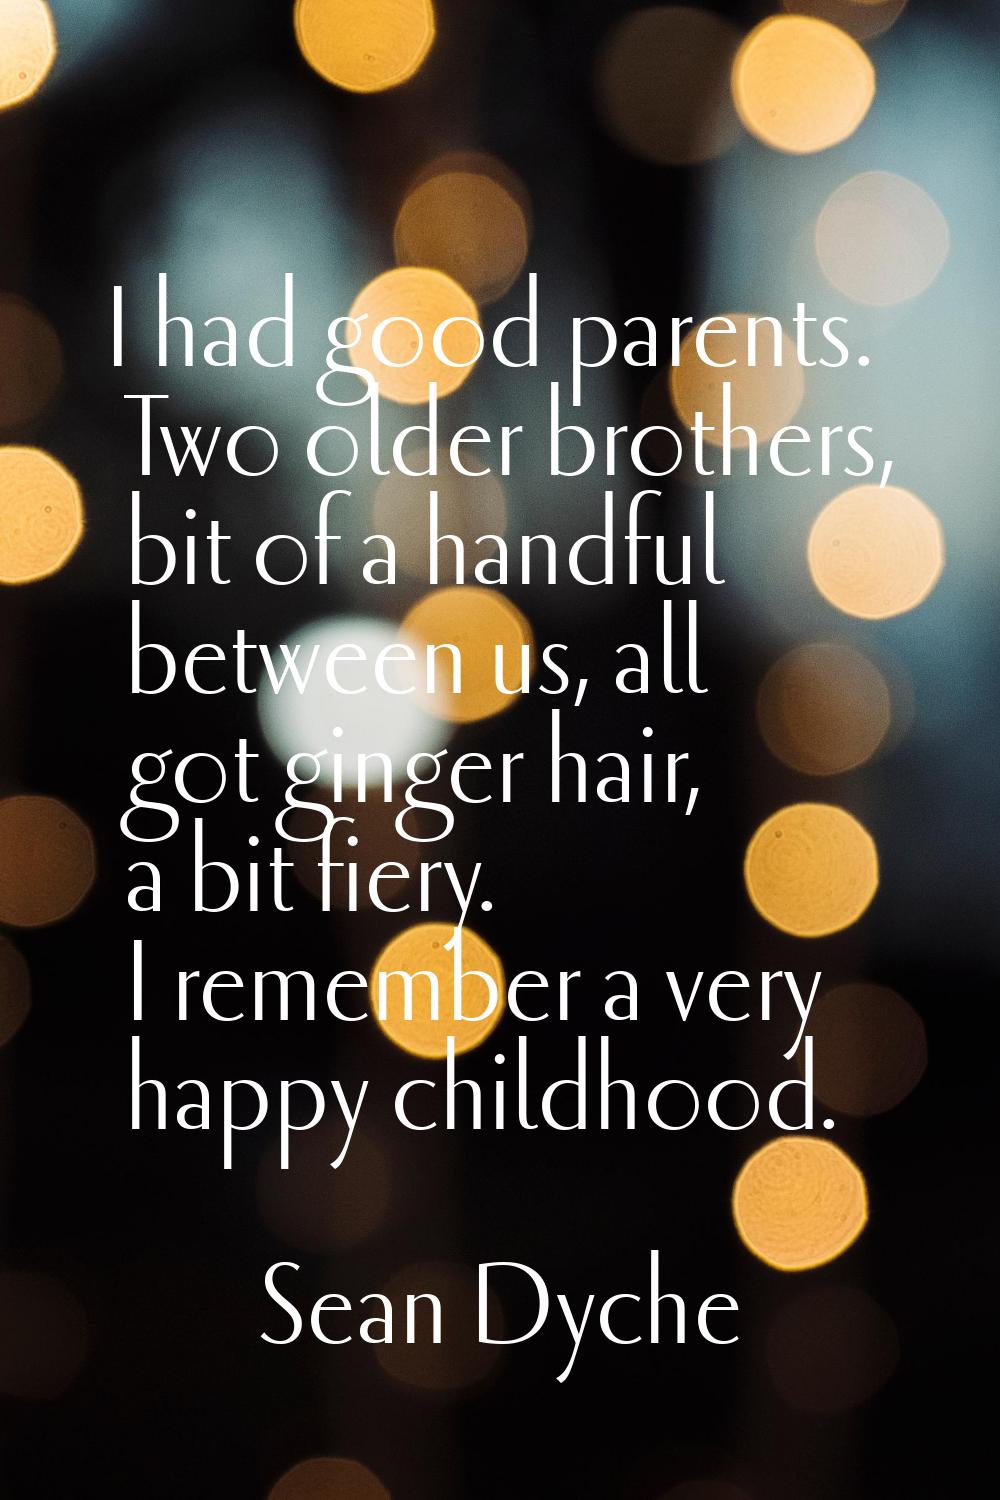 I had good parents. Two older brothers, bit of a handful between us, all got ginger hair, a bit fie